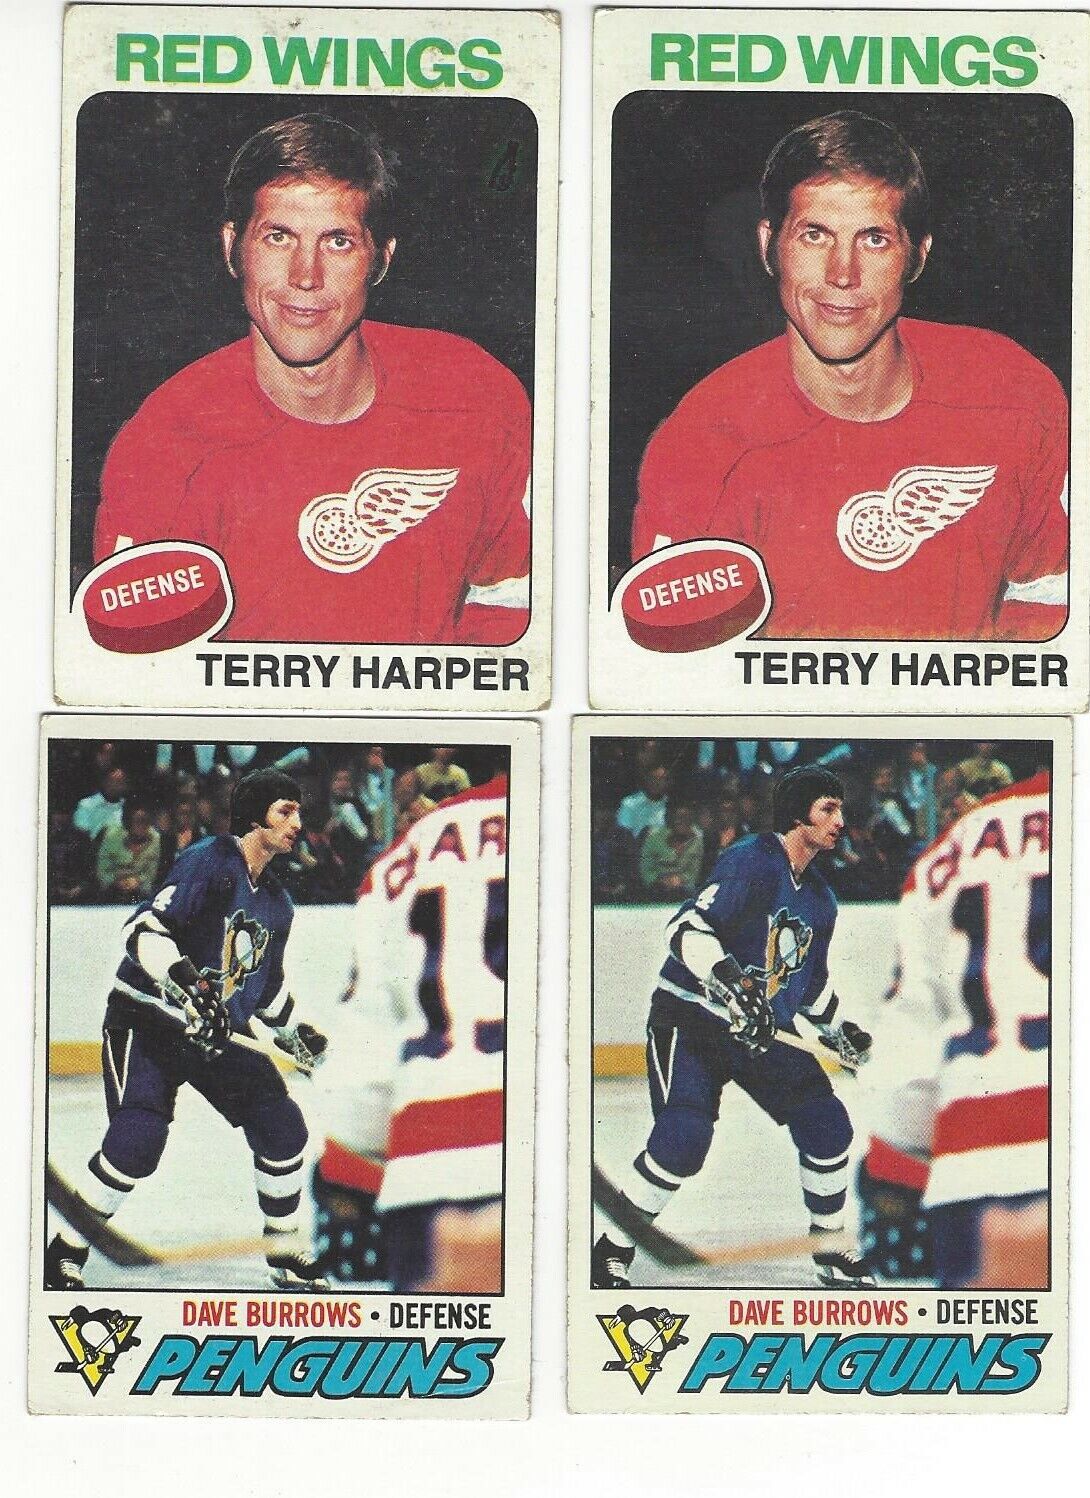  1975-76 Topps #255 Terry Harper Detroit Red Wings 